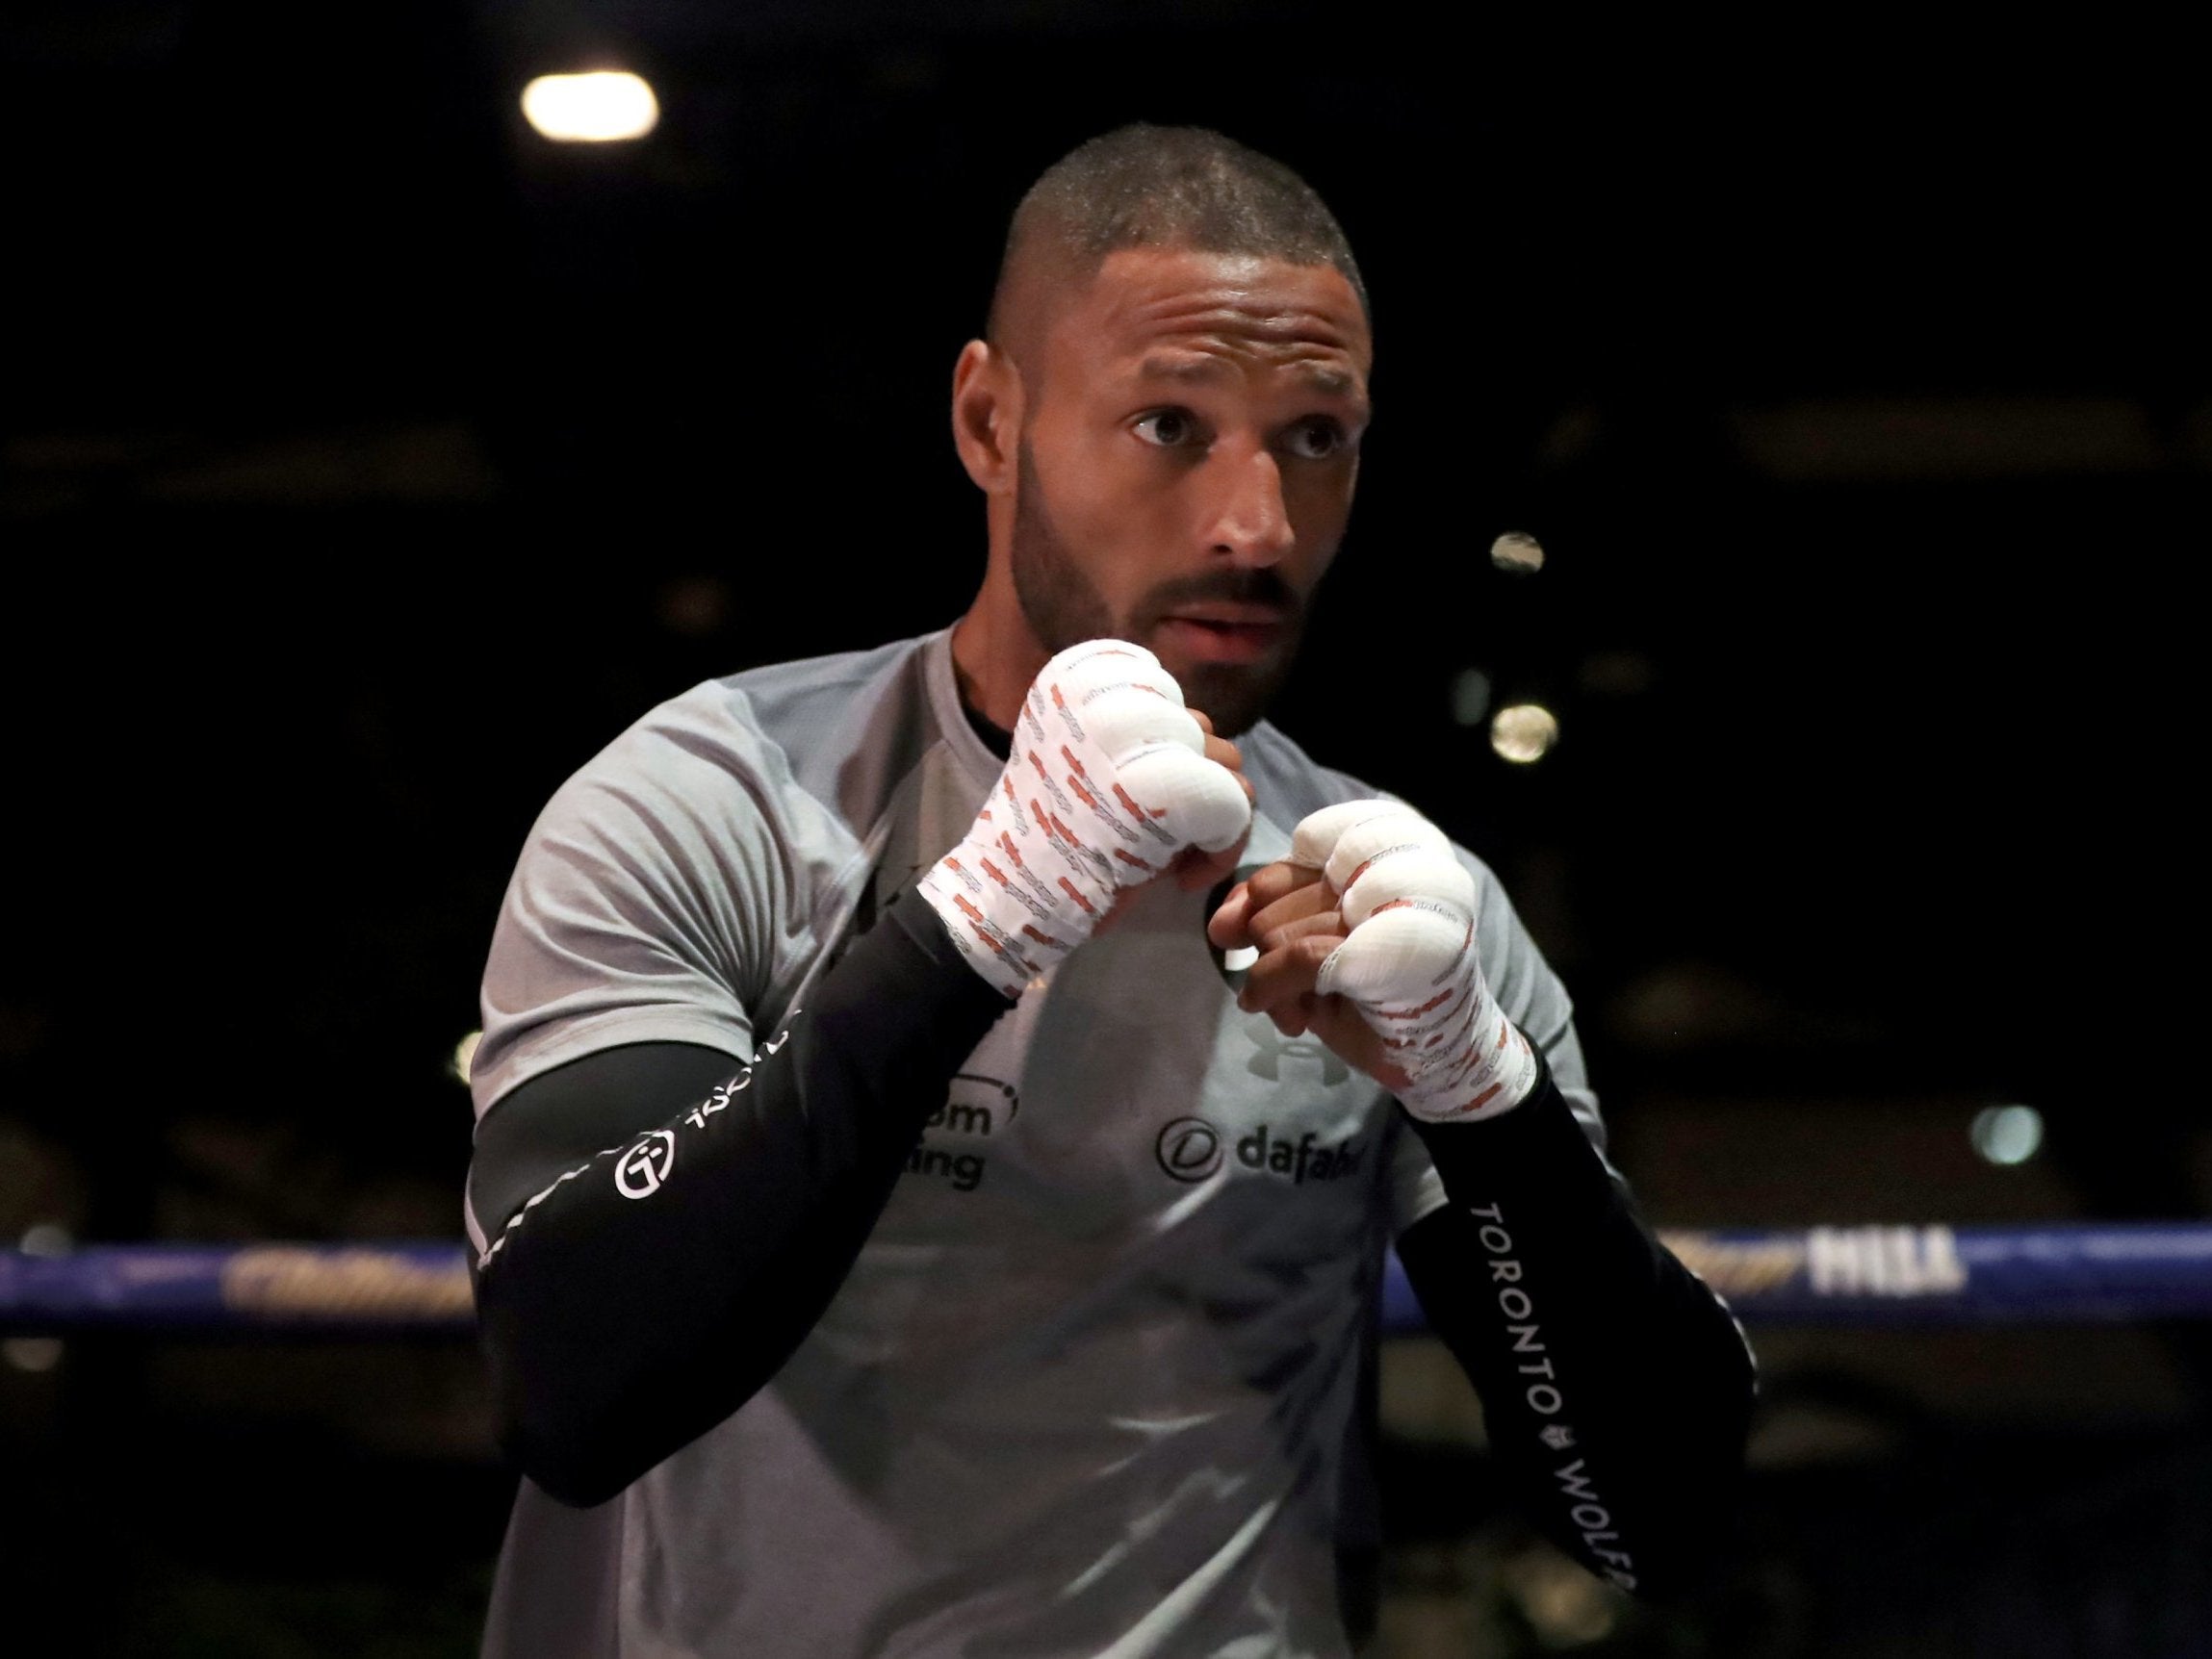 Kell Brook says Amir Khan is to blame if they do not fight